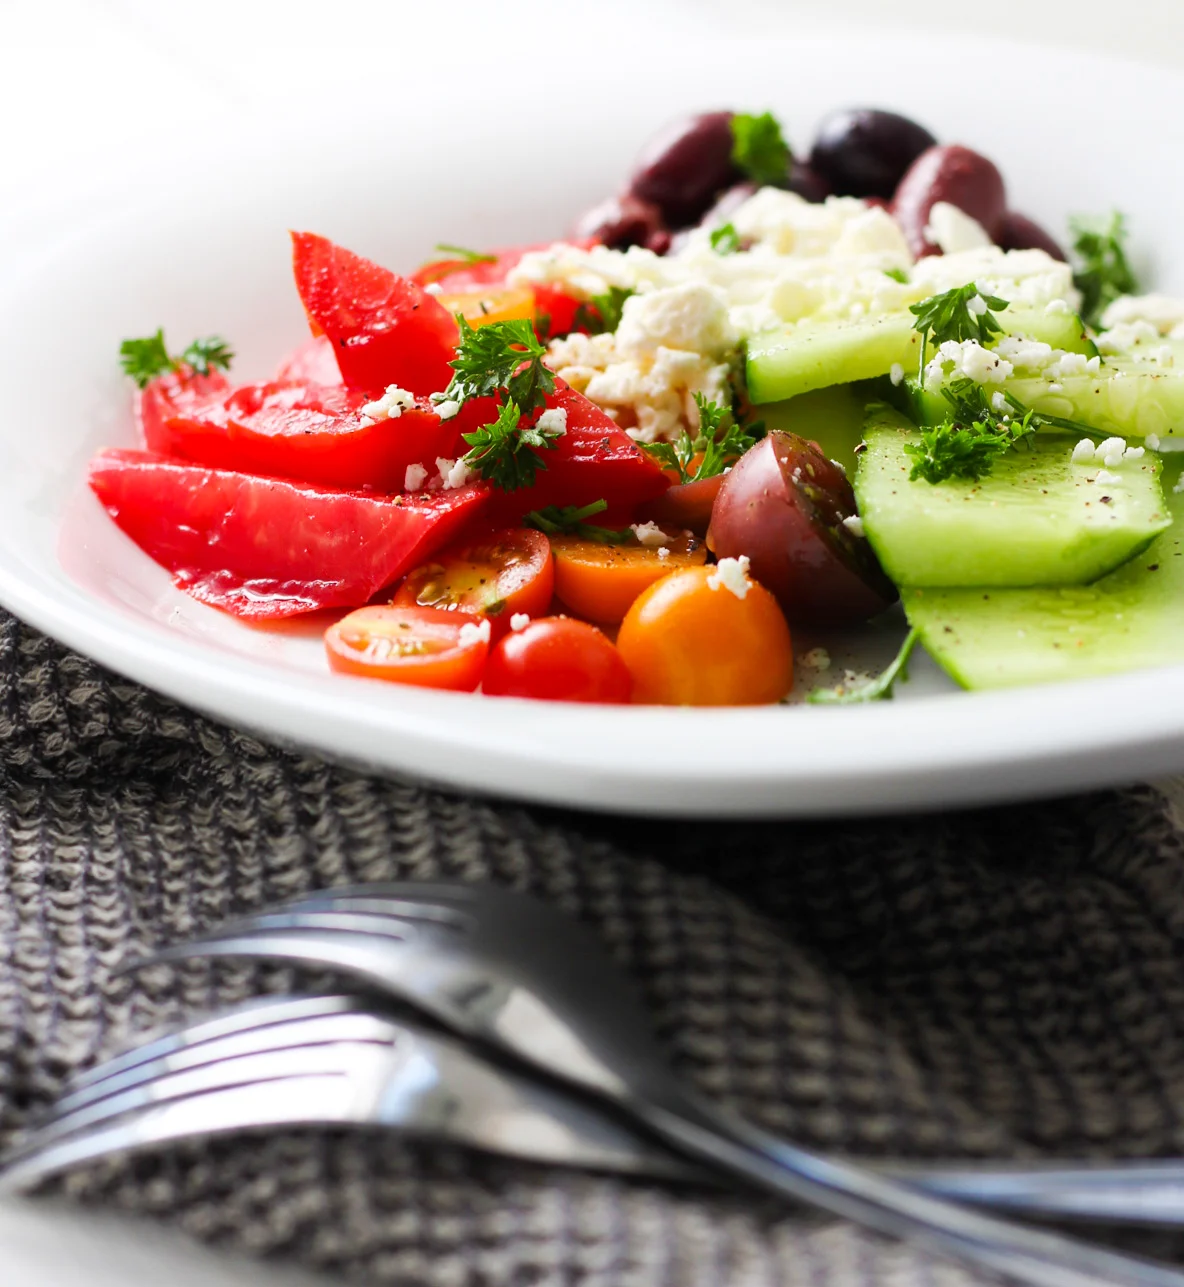 Greek salad with dressing on a white plate.